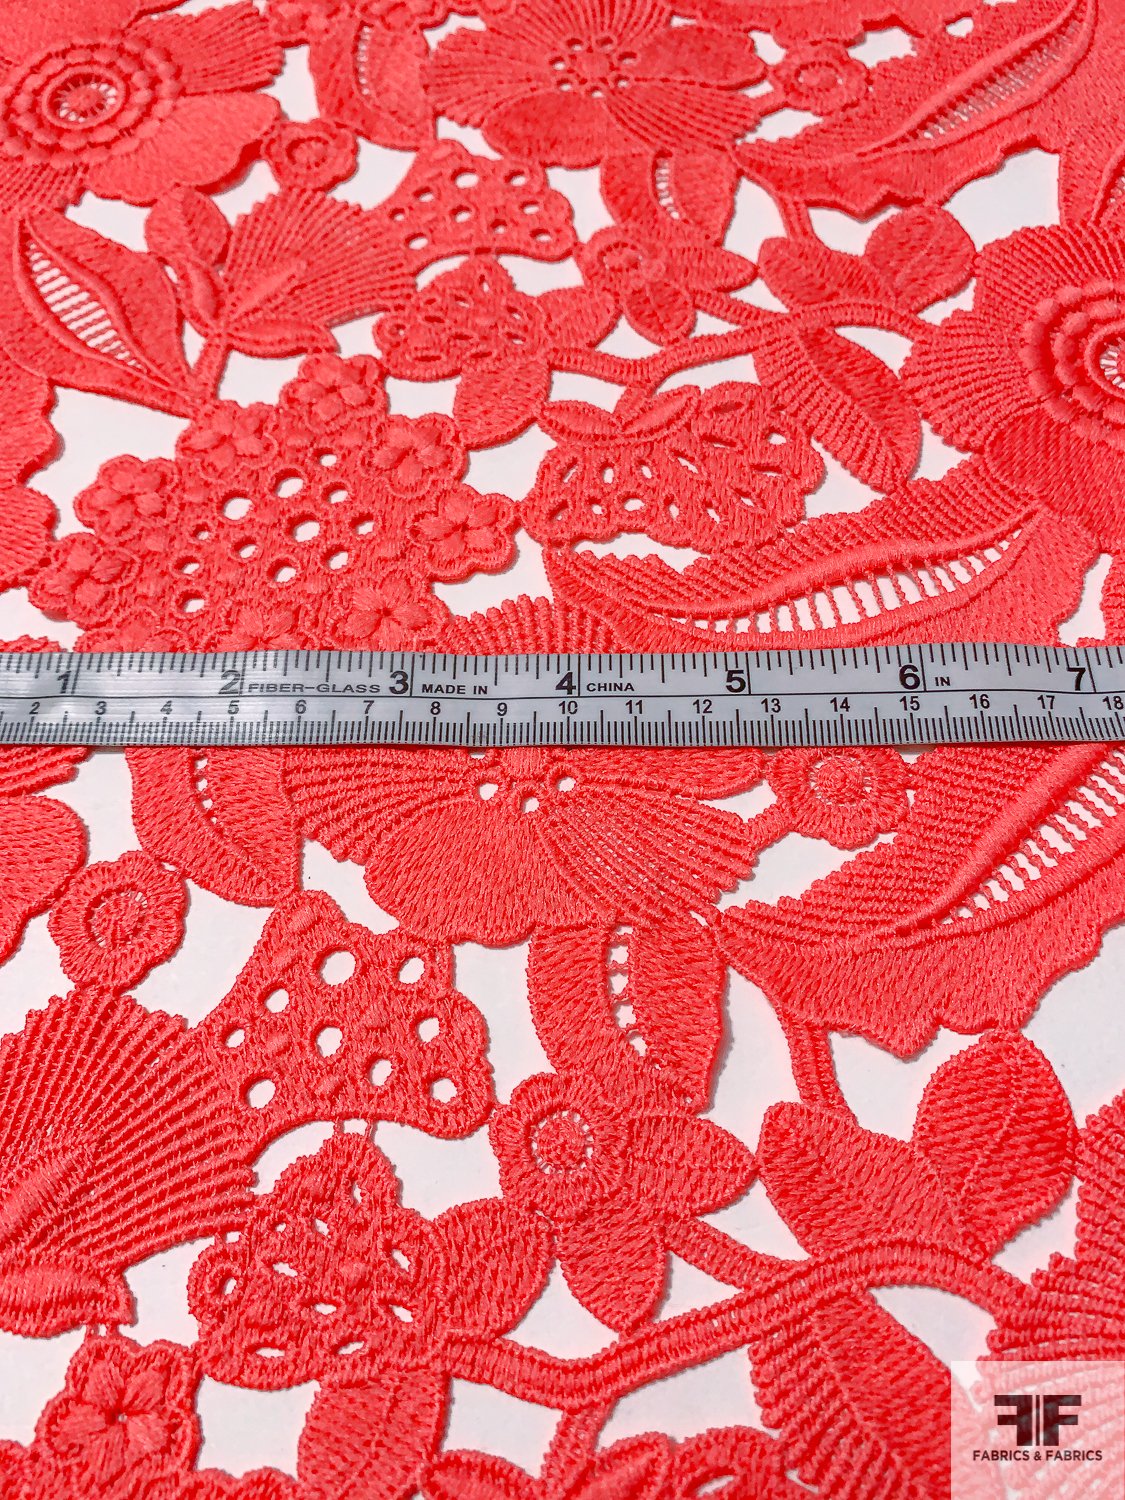 Leaf and Floral Guipure Lace - Deep Coral